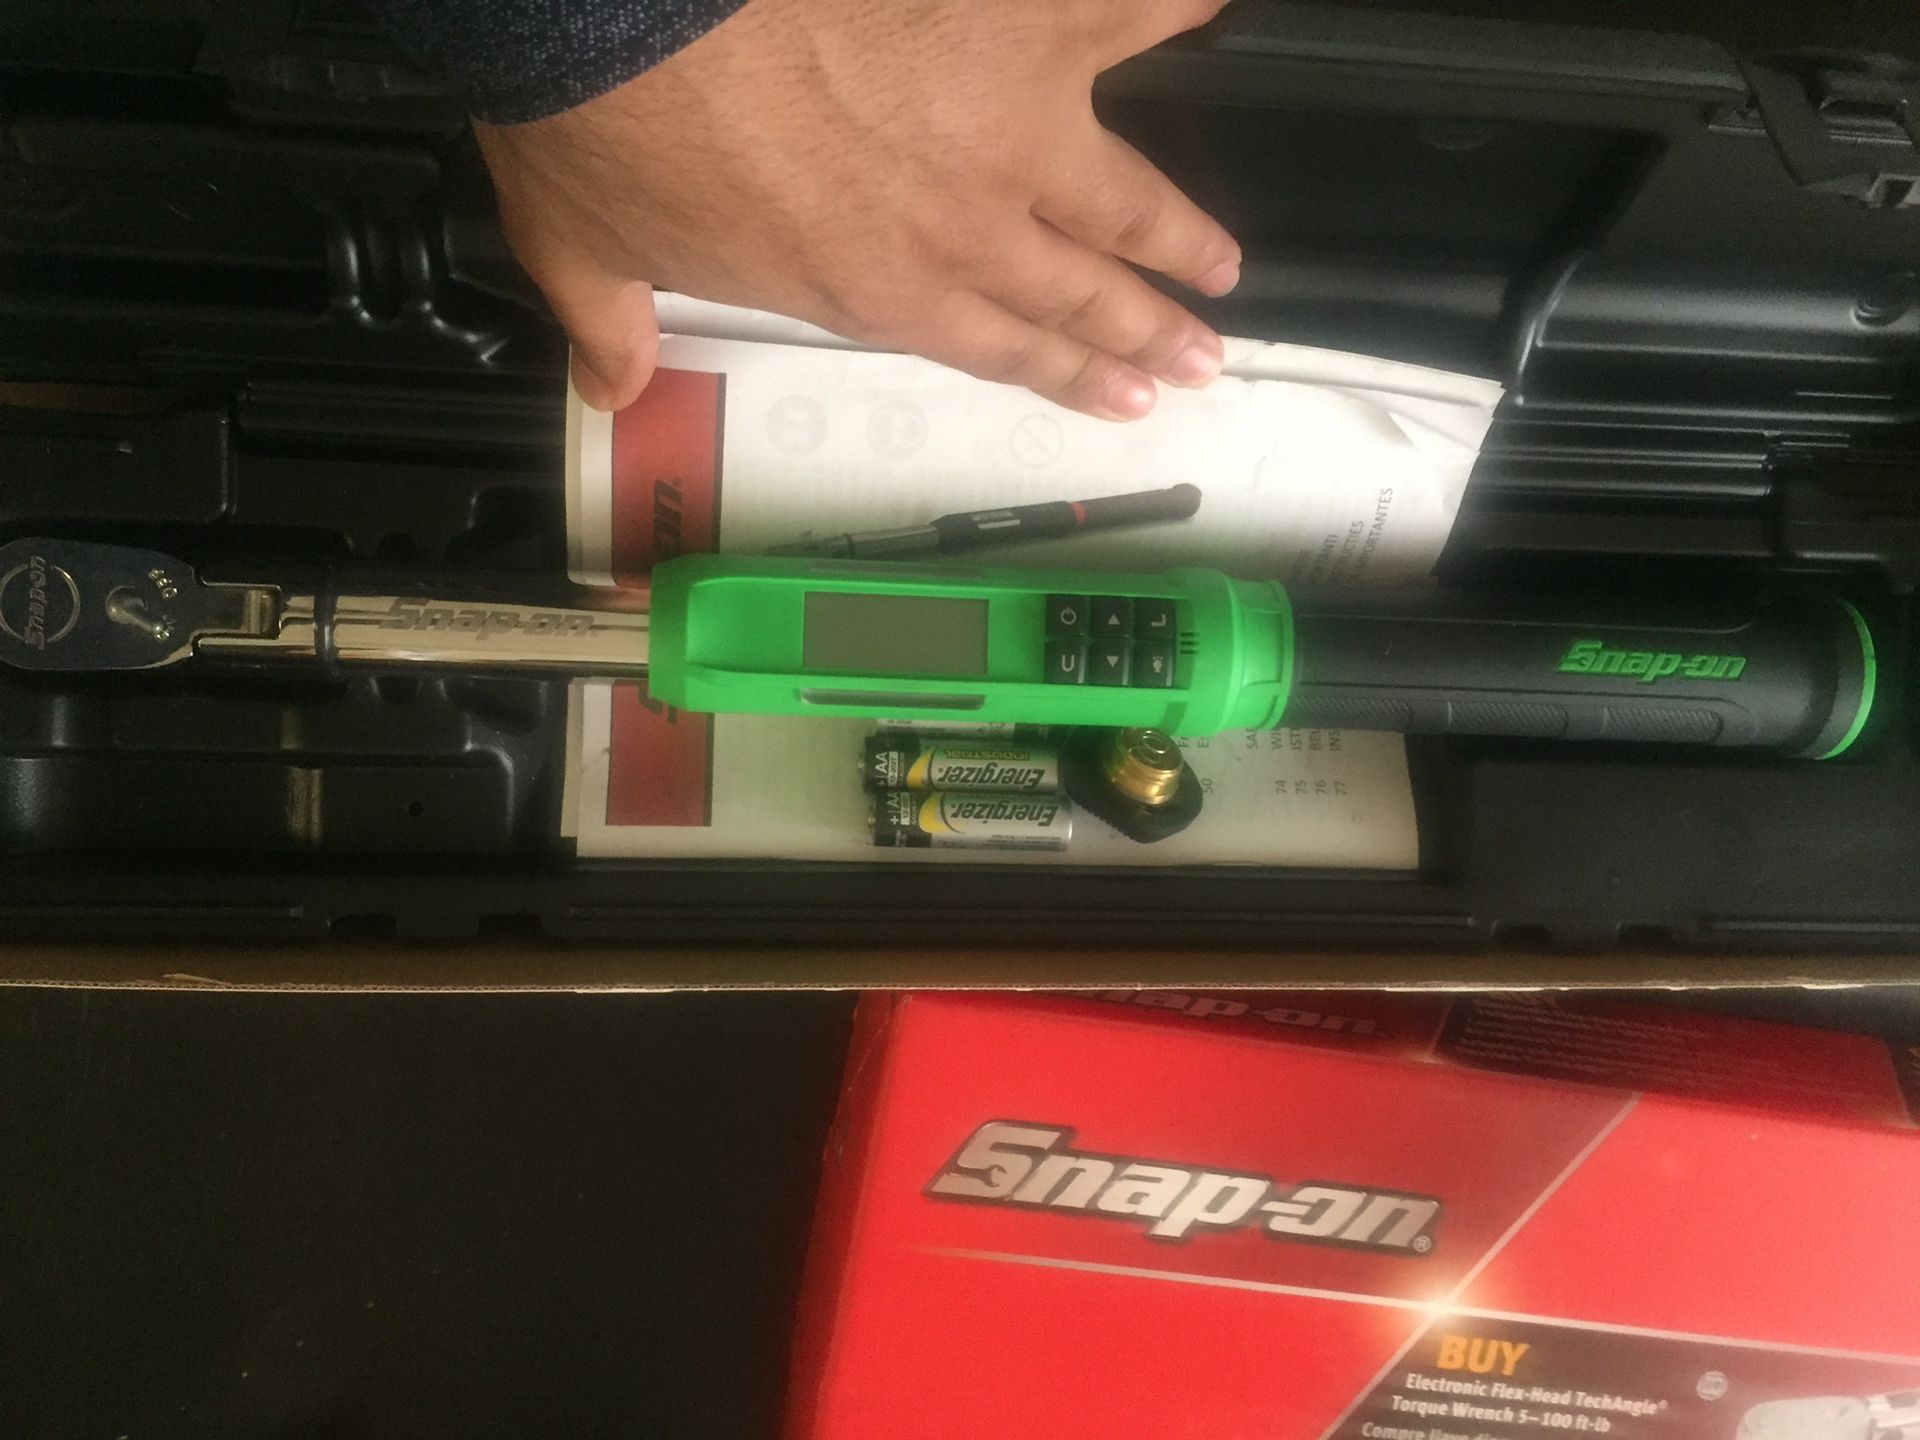 Digital torque wrench brand new snap on $300